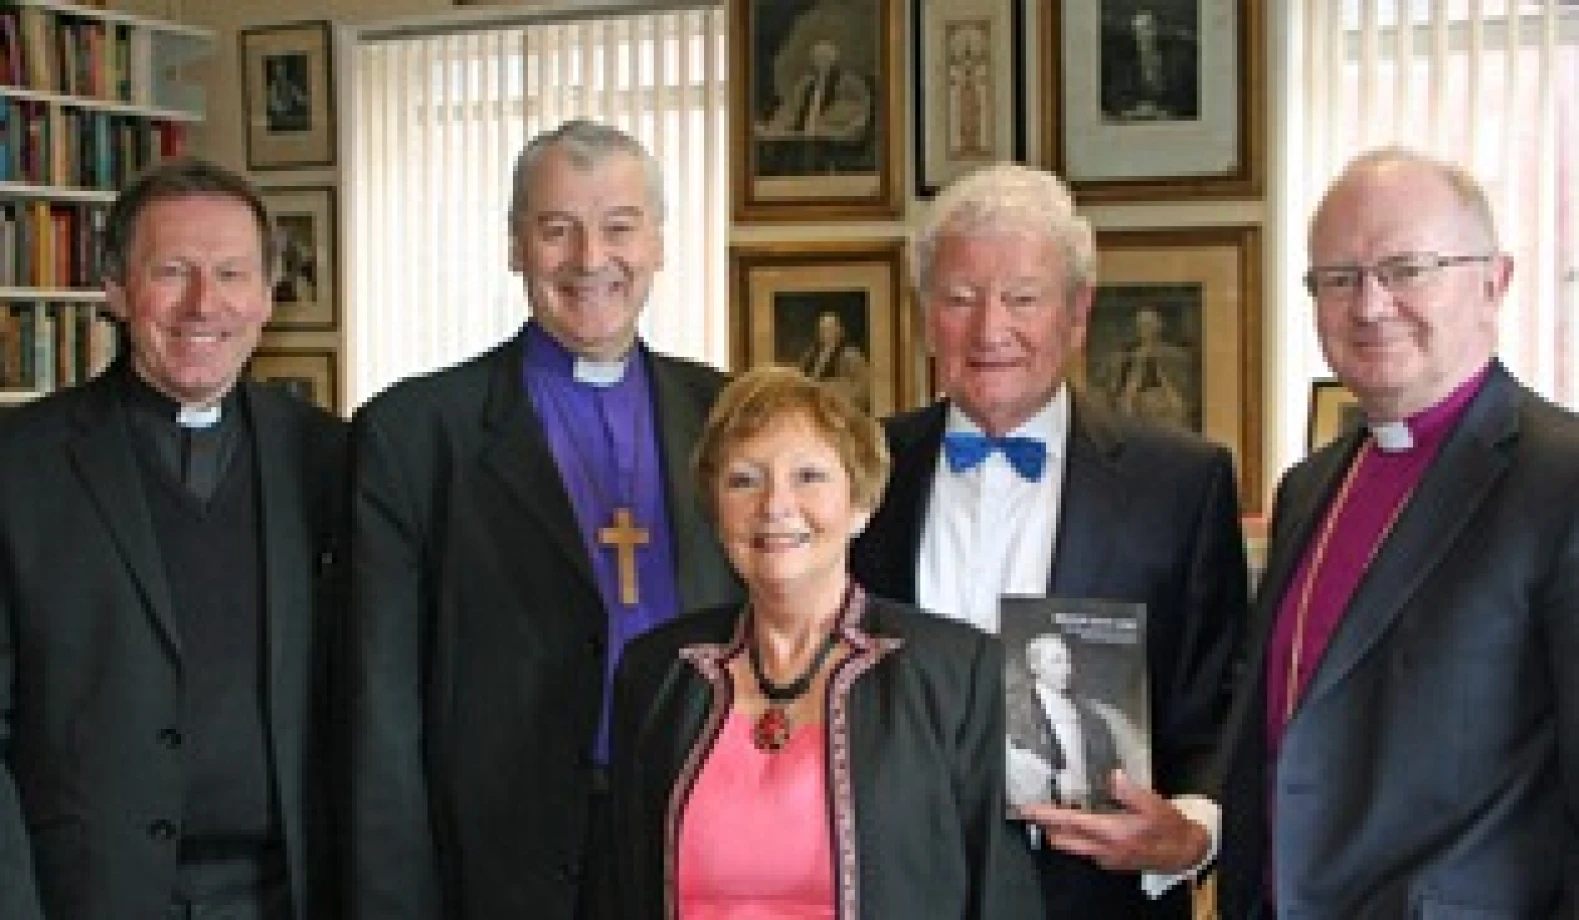 Launch of new book on Bishop John Jebb